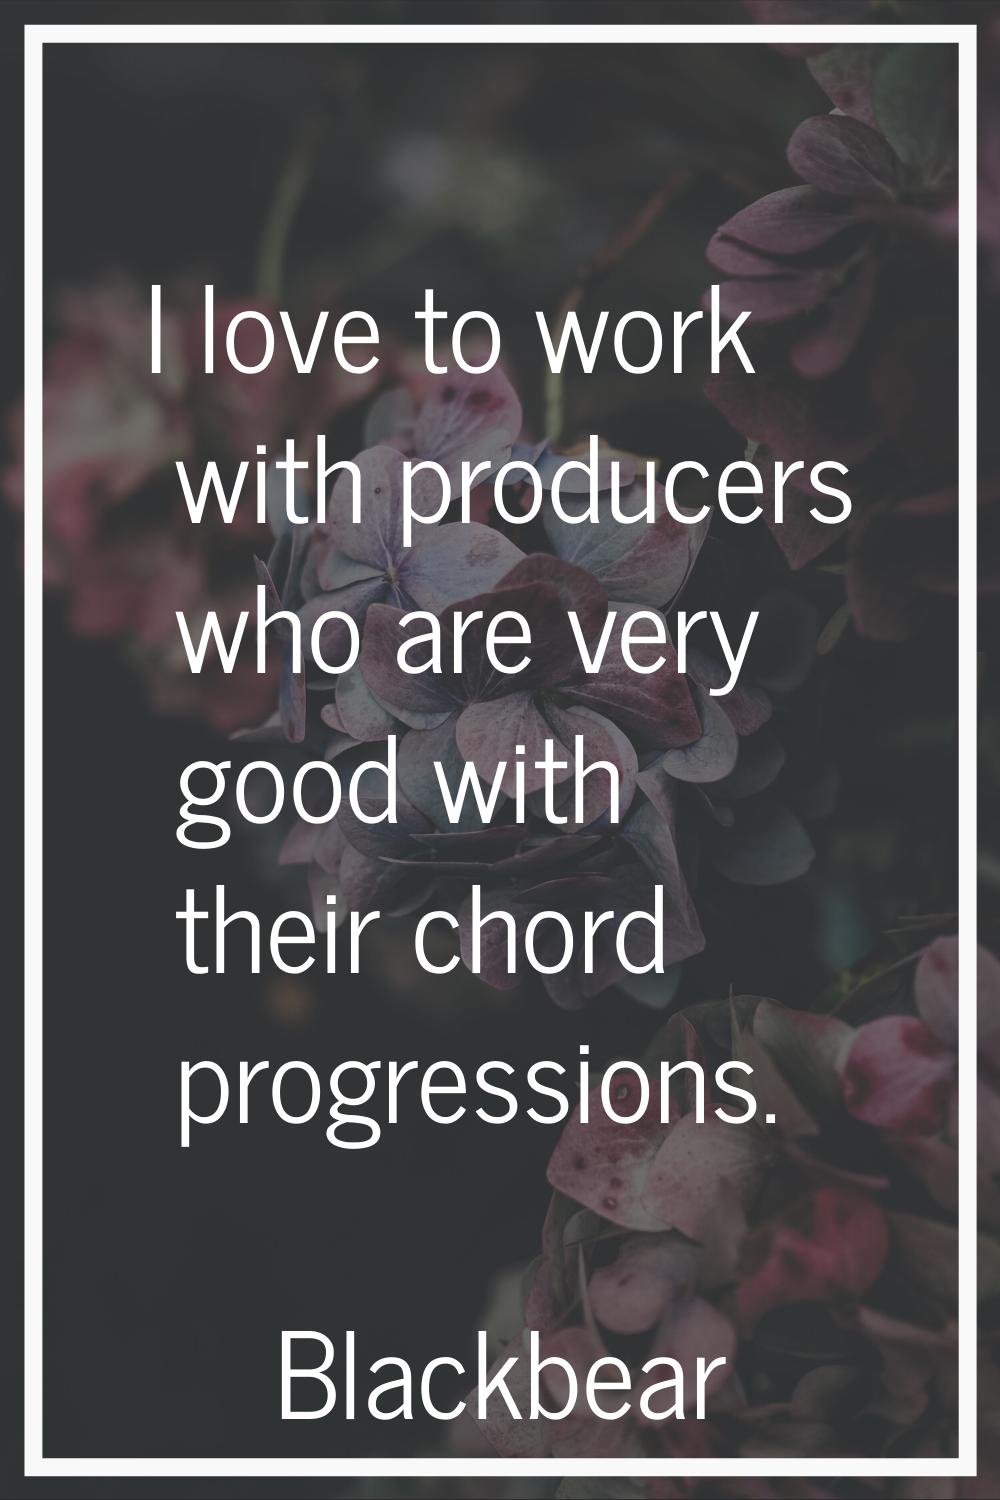 I love to work with producers who are very good with their chord progressions.